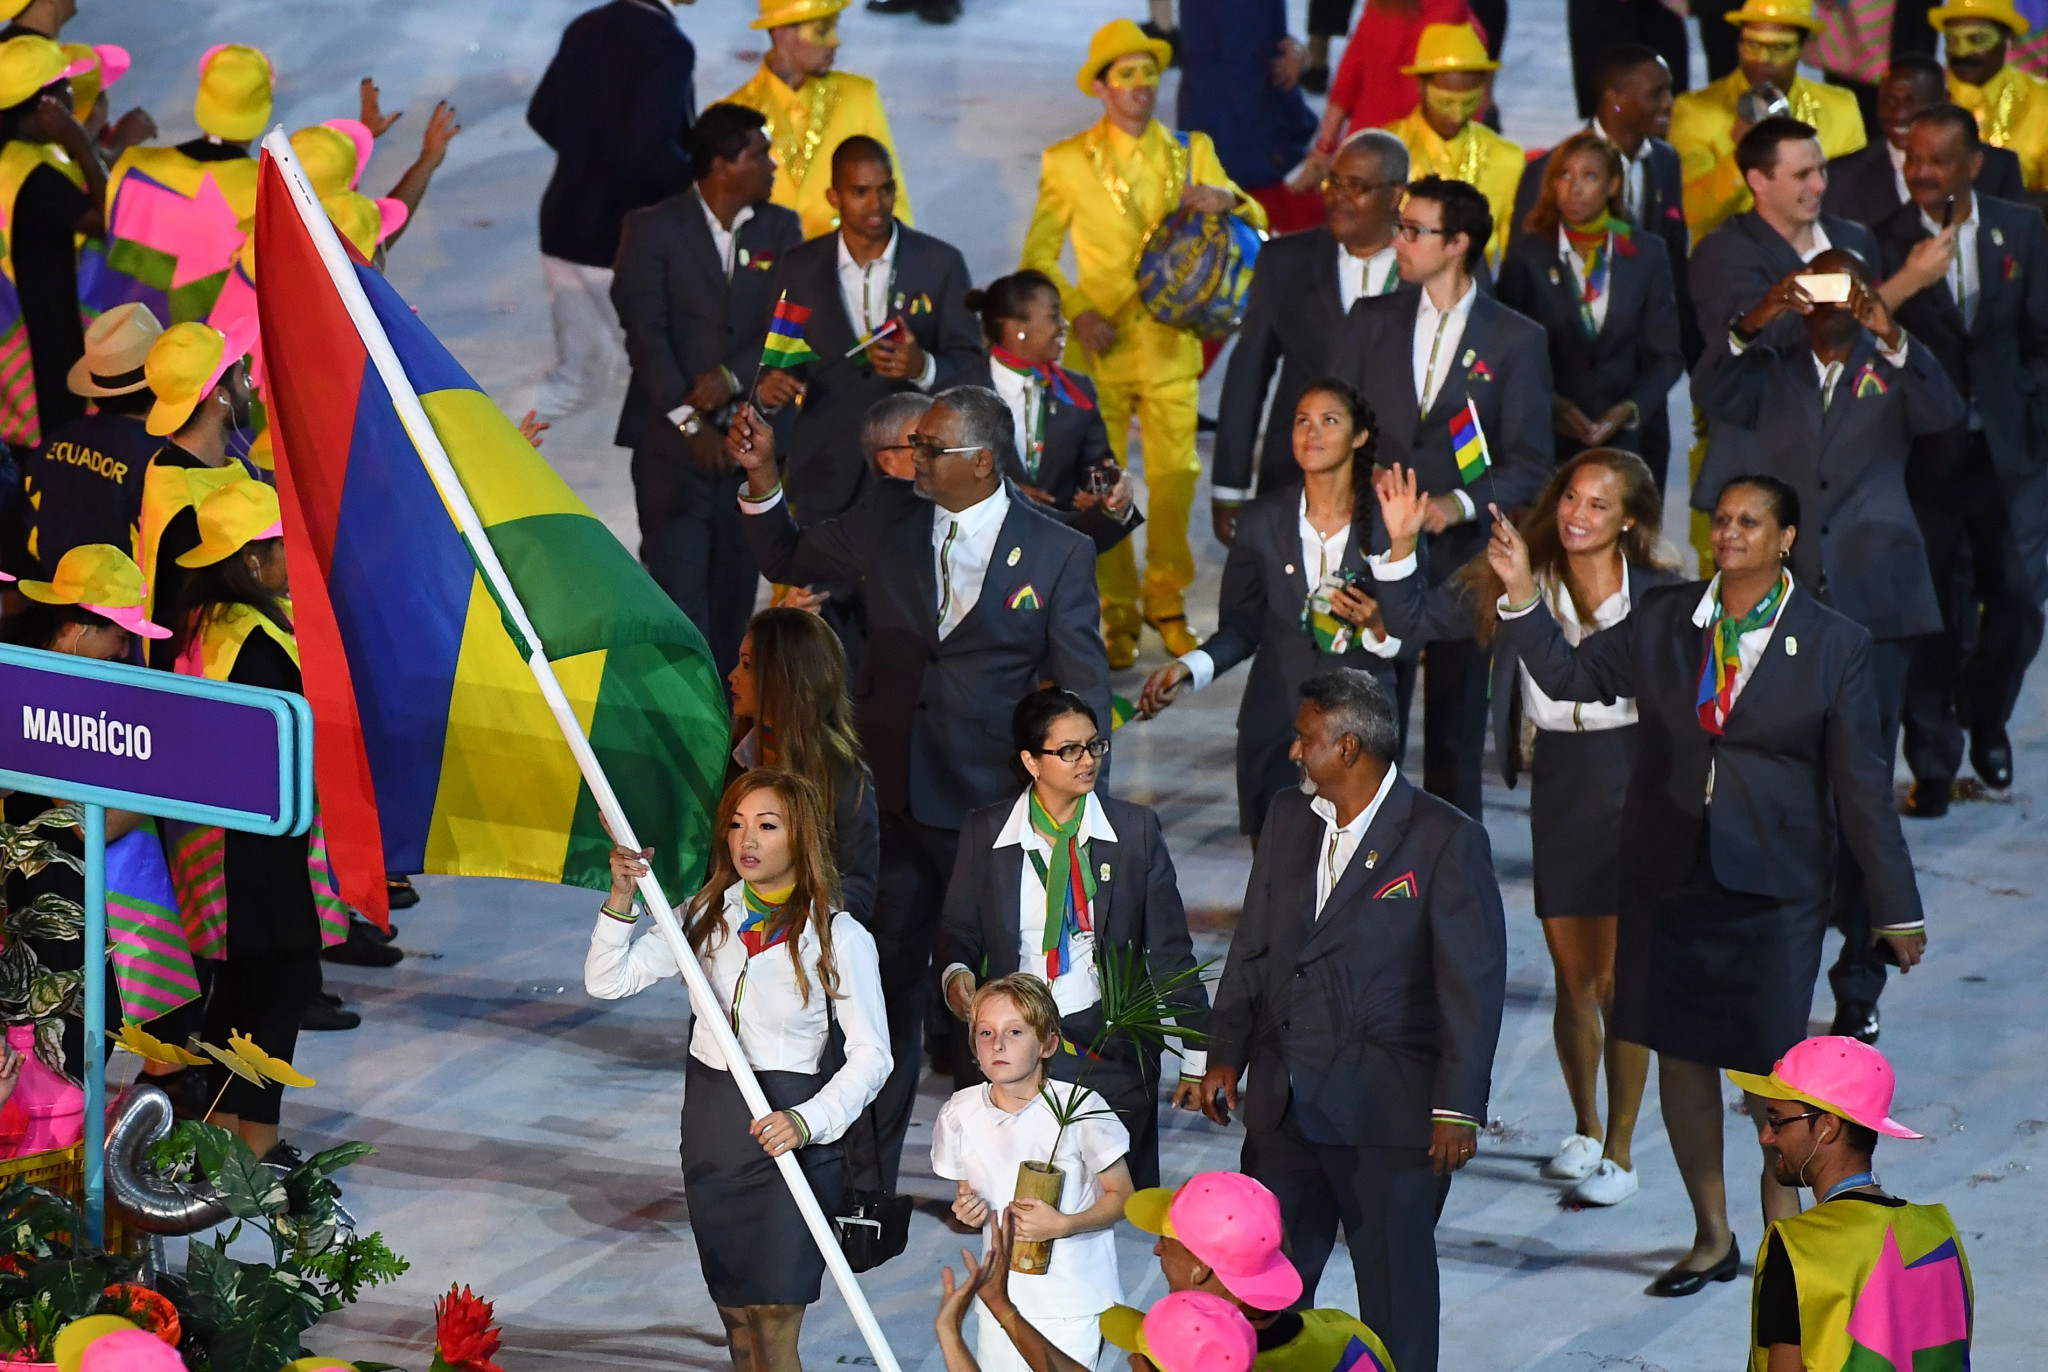 Kate Foo Kune carried Mauritius' flag during the Rio 2016 Opening Ceremony ©Getty Images